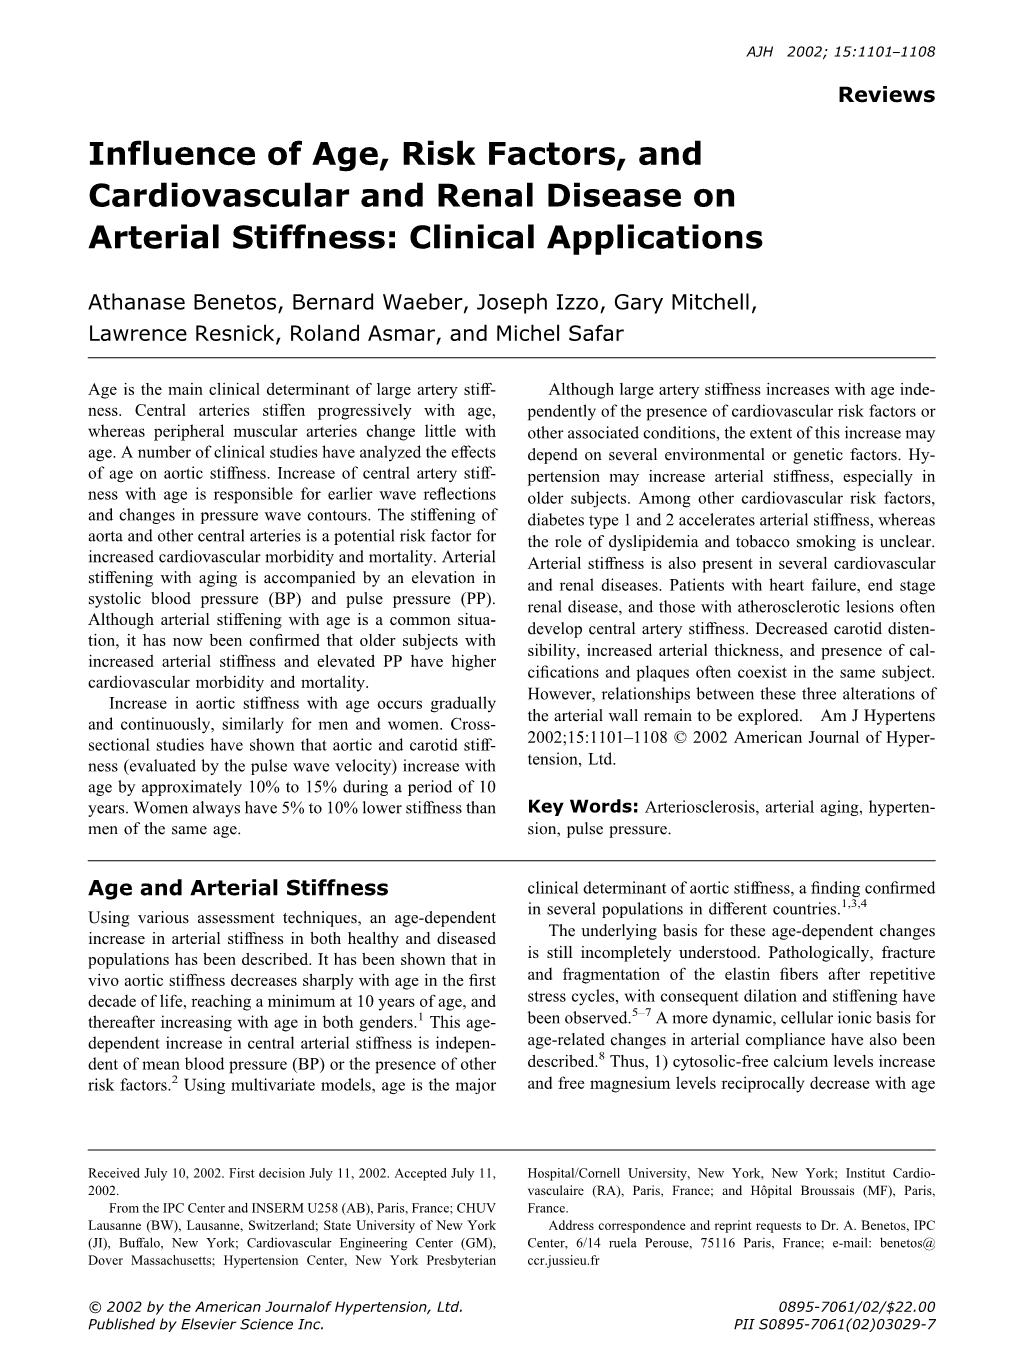 Influence of Age, Risk Factors, and Cardiovascular and Renal Disease on Arterial Stiffness: Clinical Applications